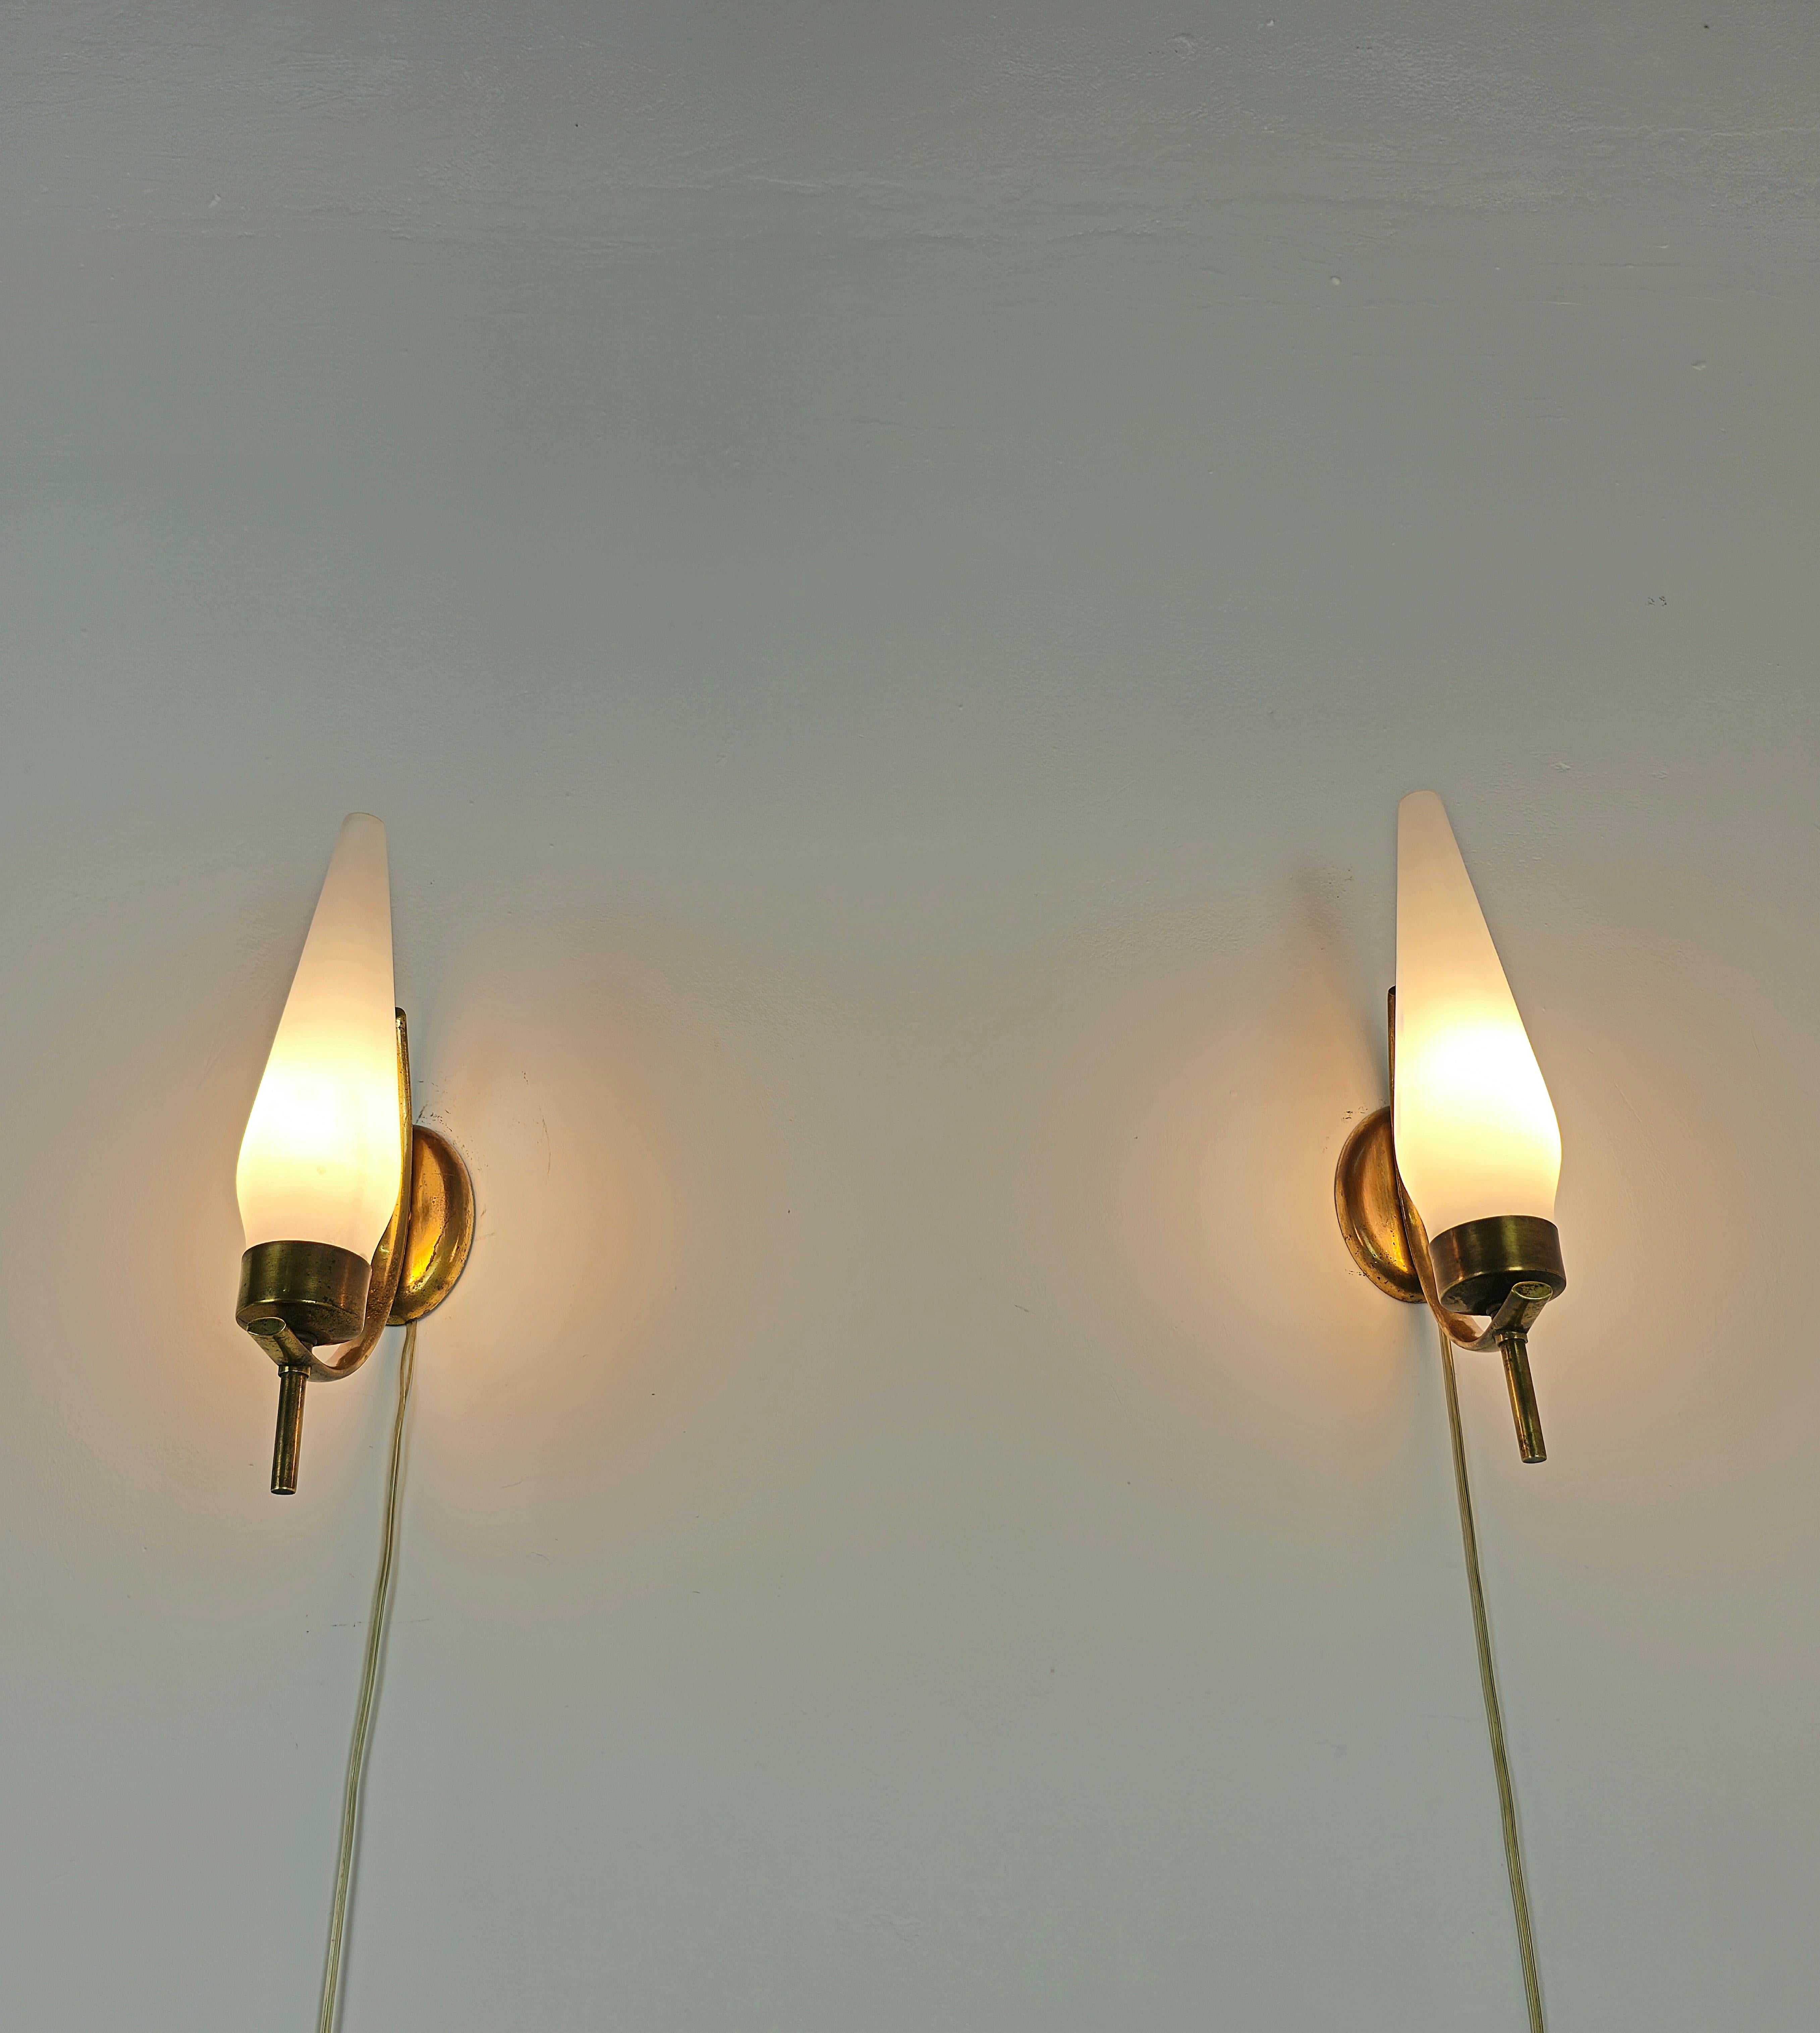 Pair of Wall Lights Sconces Brass Opaline Glass Midcentury Italian Design 1960s  For Sale 1